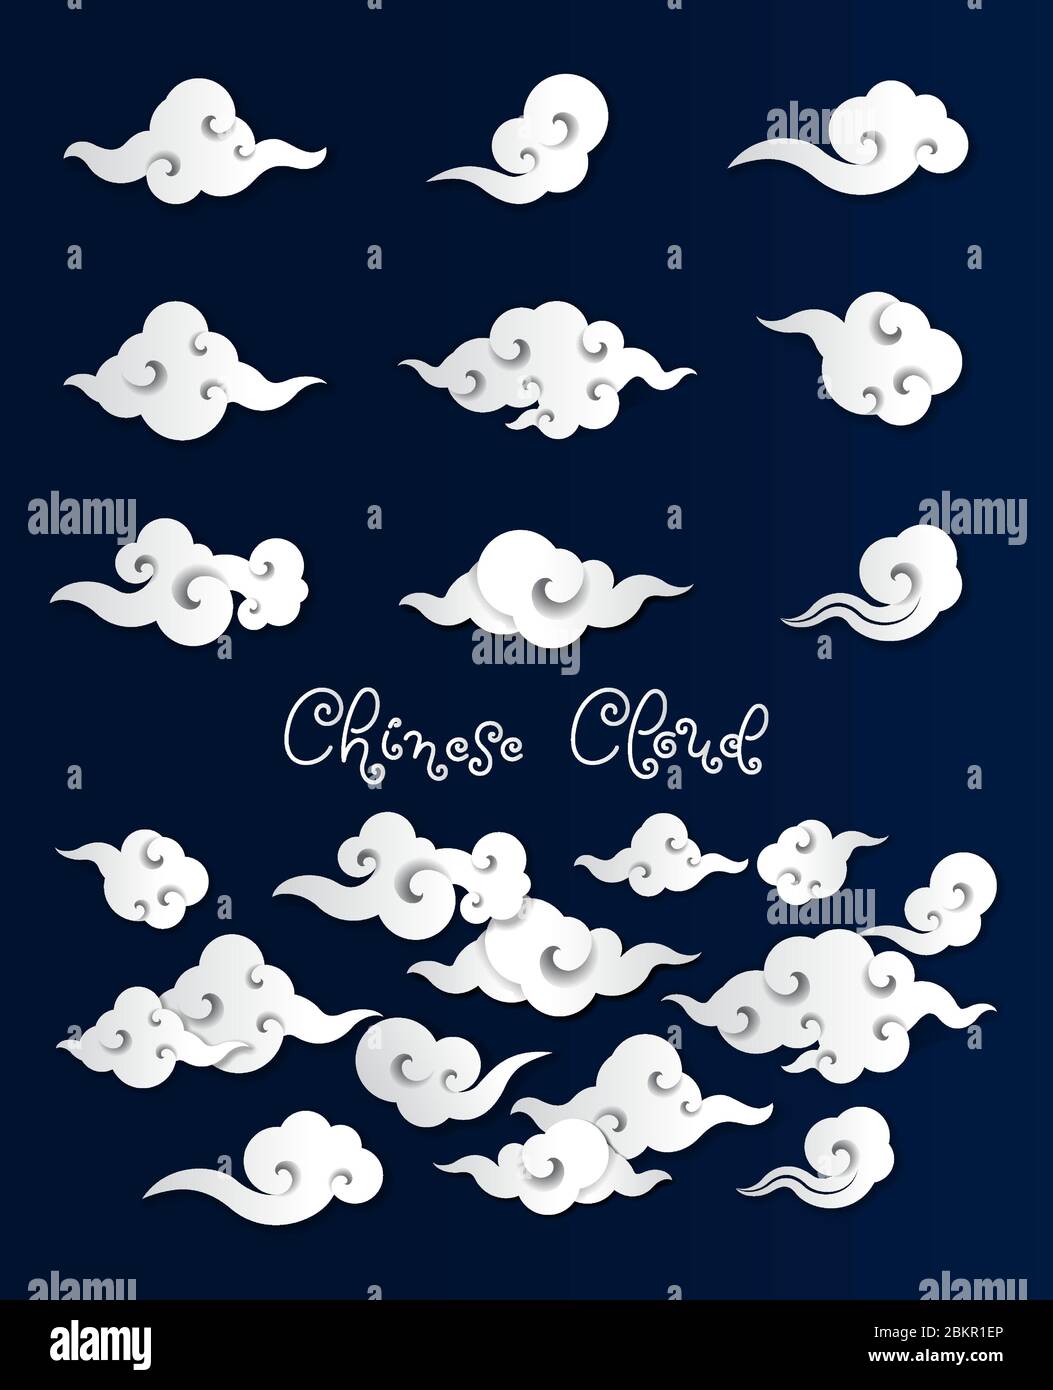 Chinese clouds paper cut style vector illustration set. For Mid autumn or Chinese new year festival decoration. Stock Vector